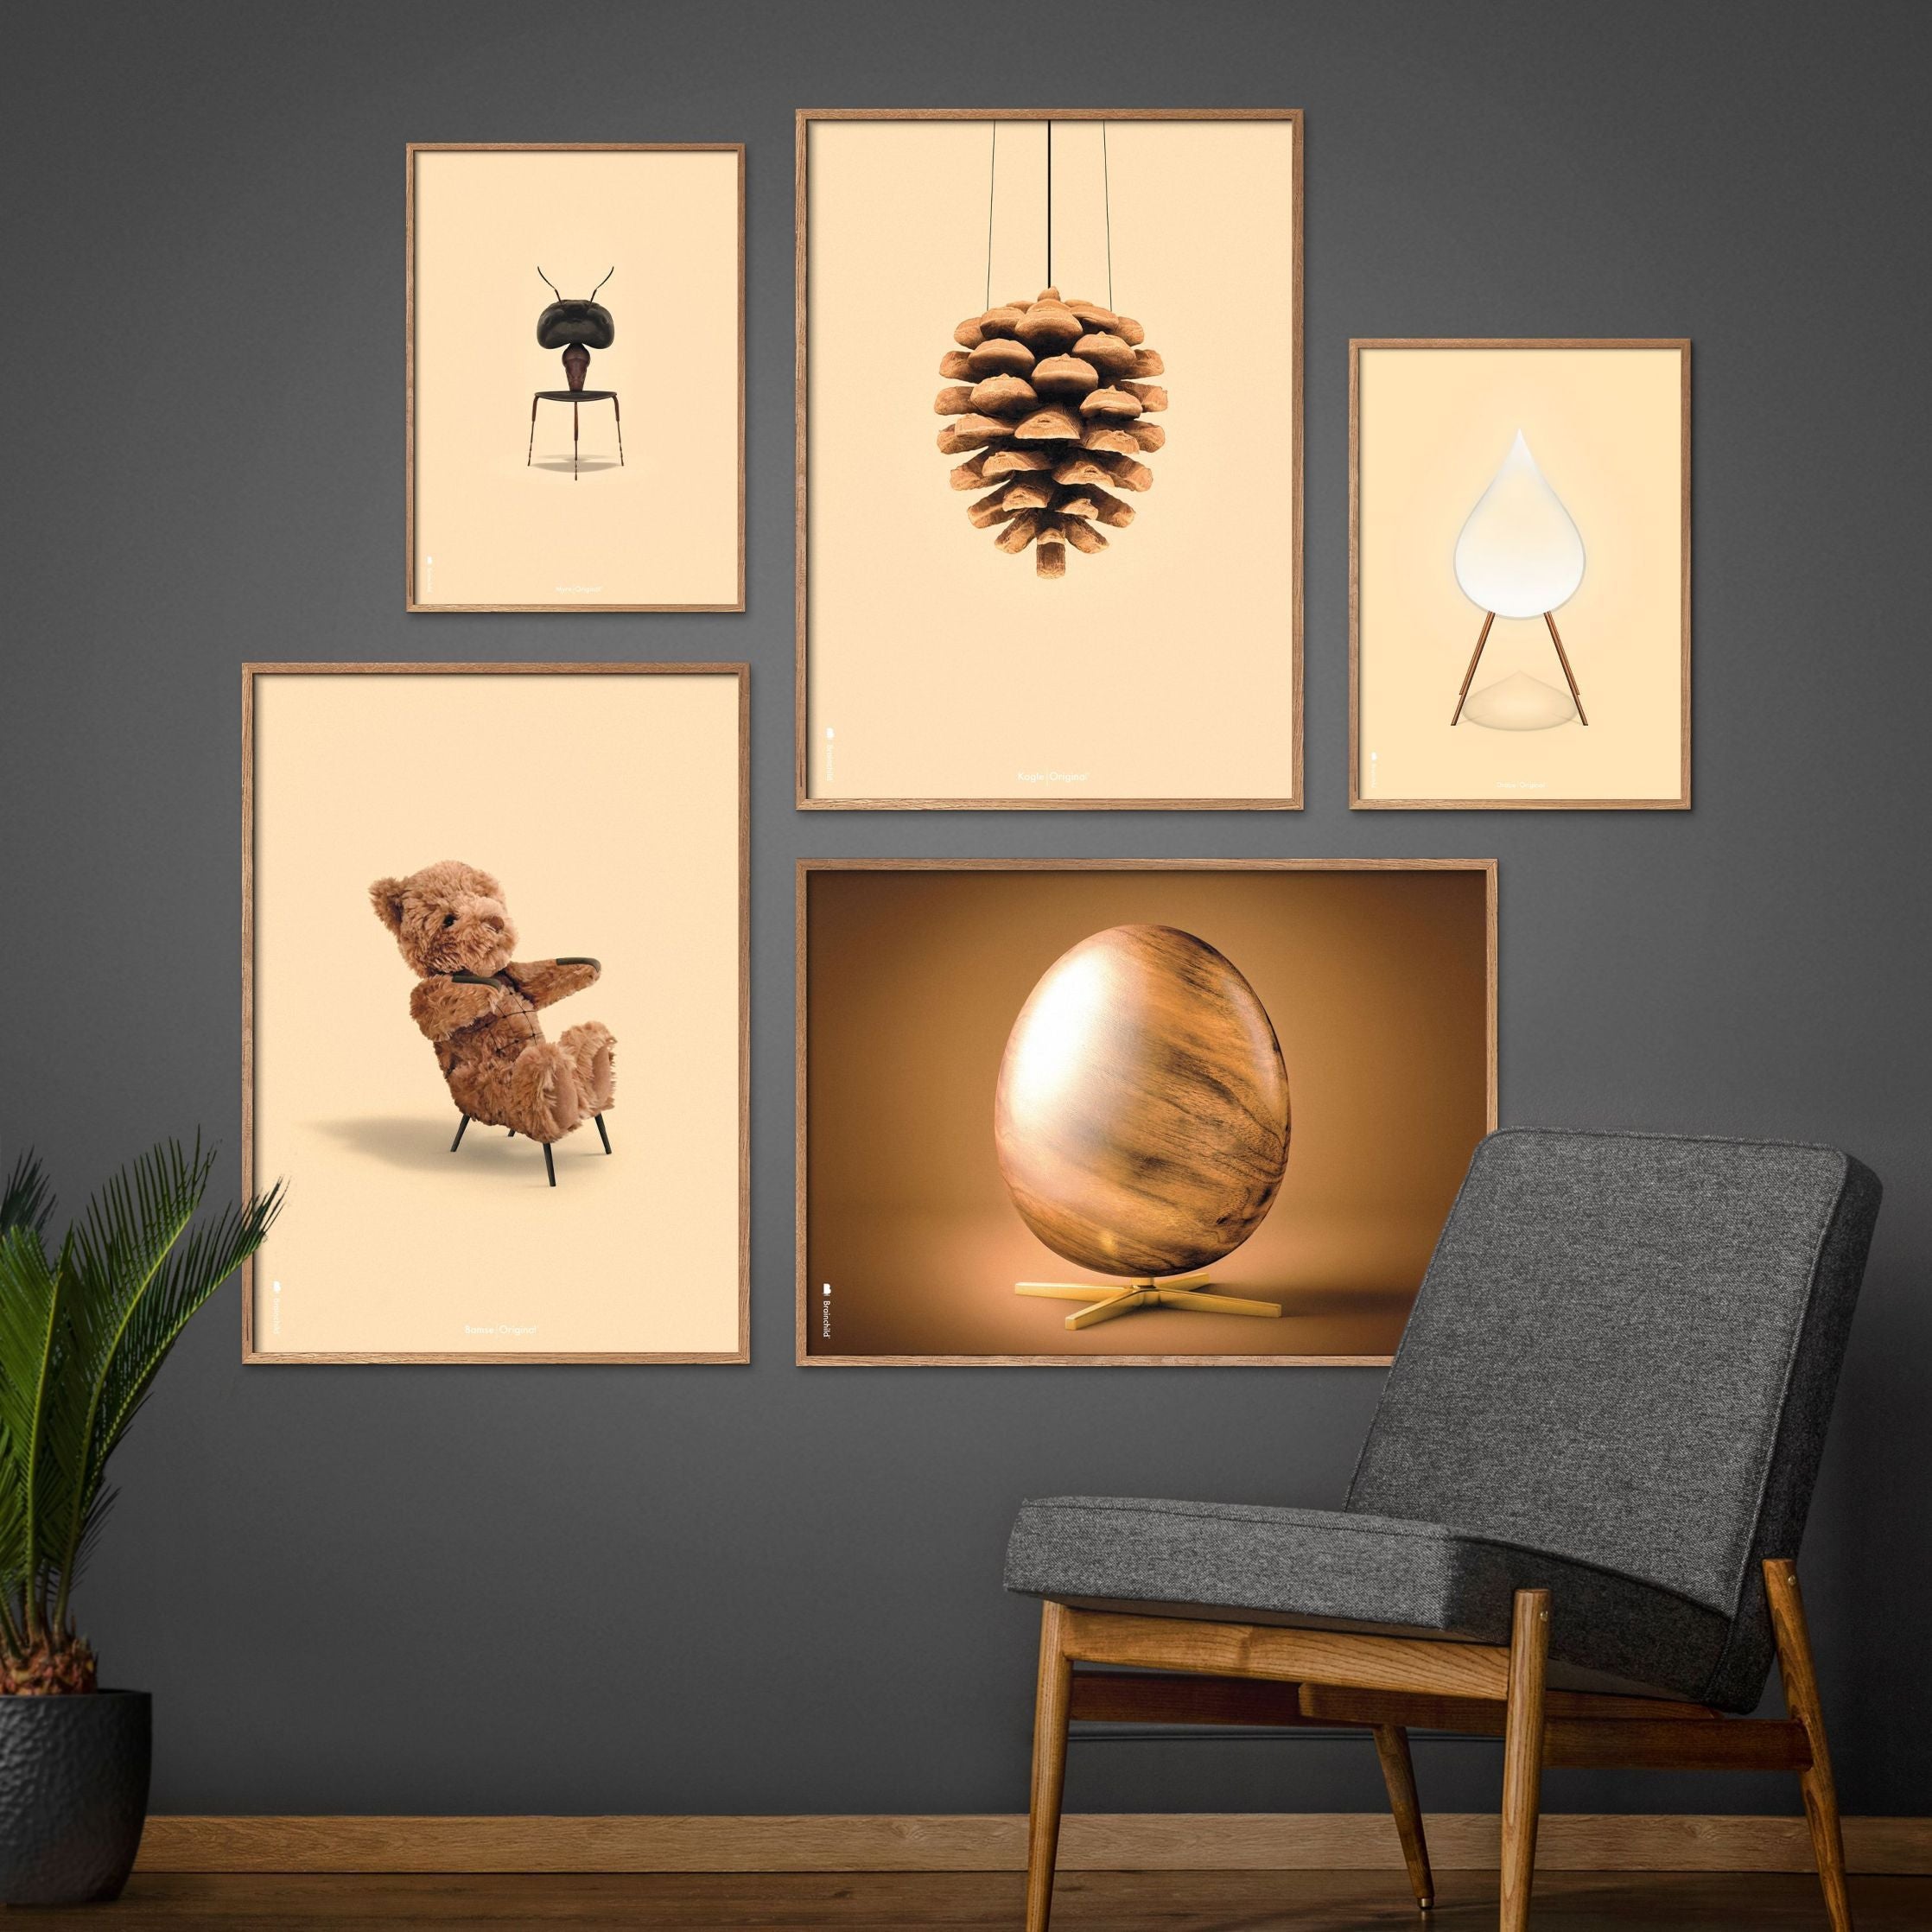 Brainchild Drop Classic Poster, Dark Wood Frame A5, Sand Colored Background